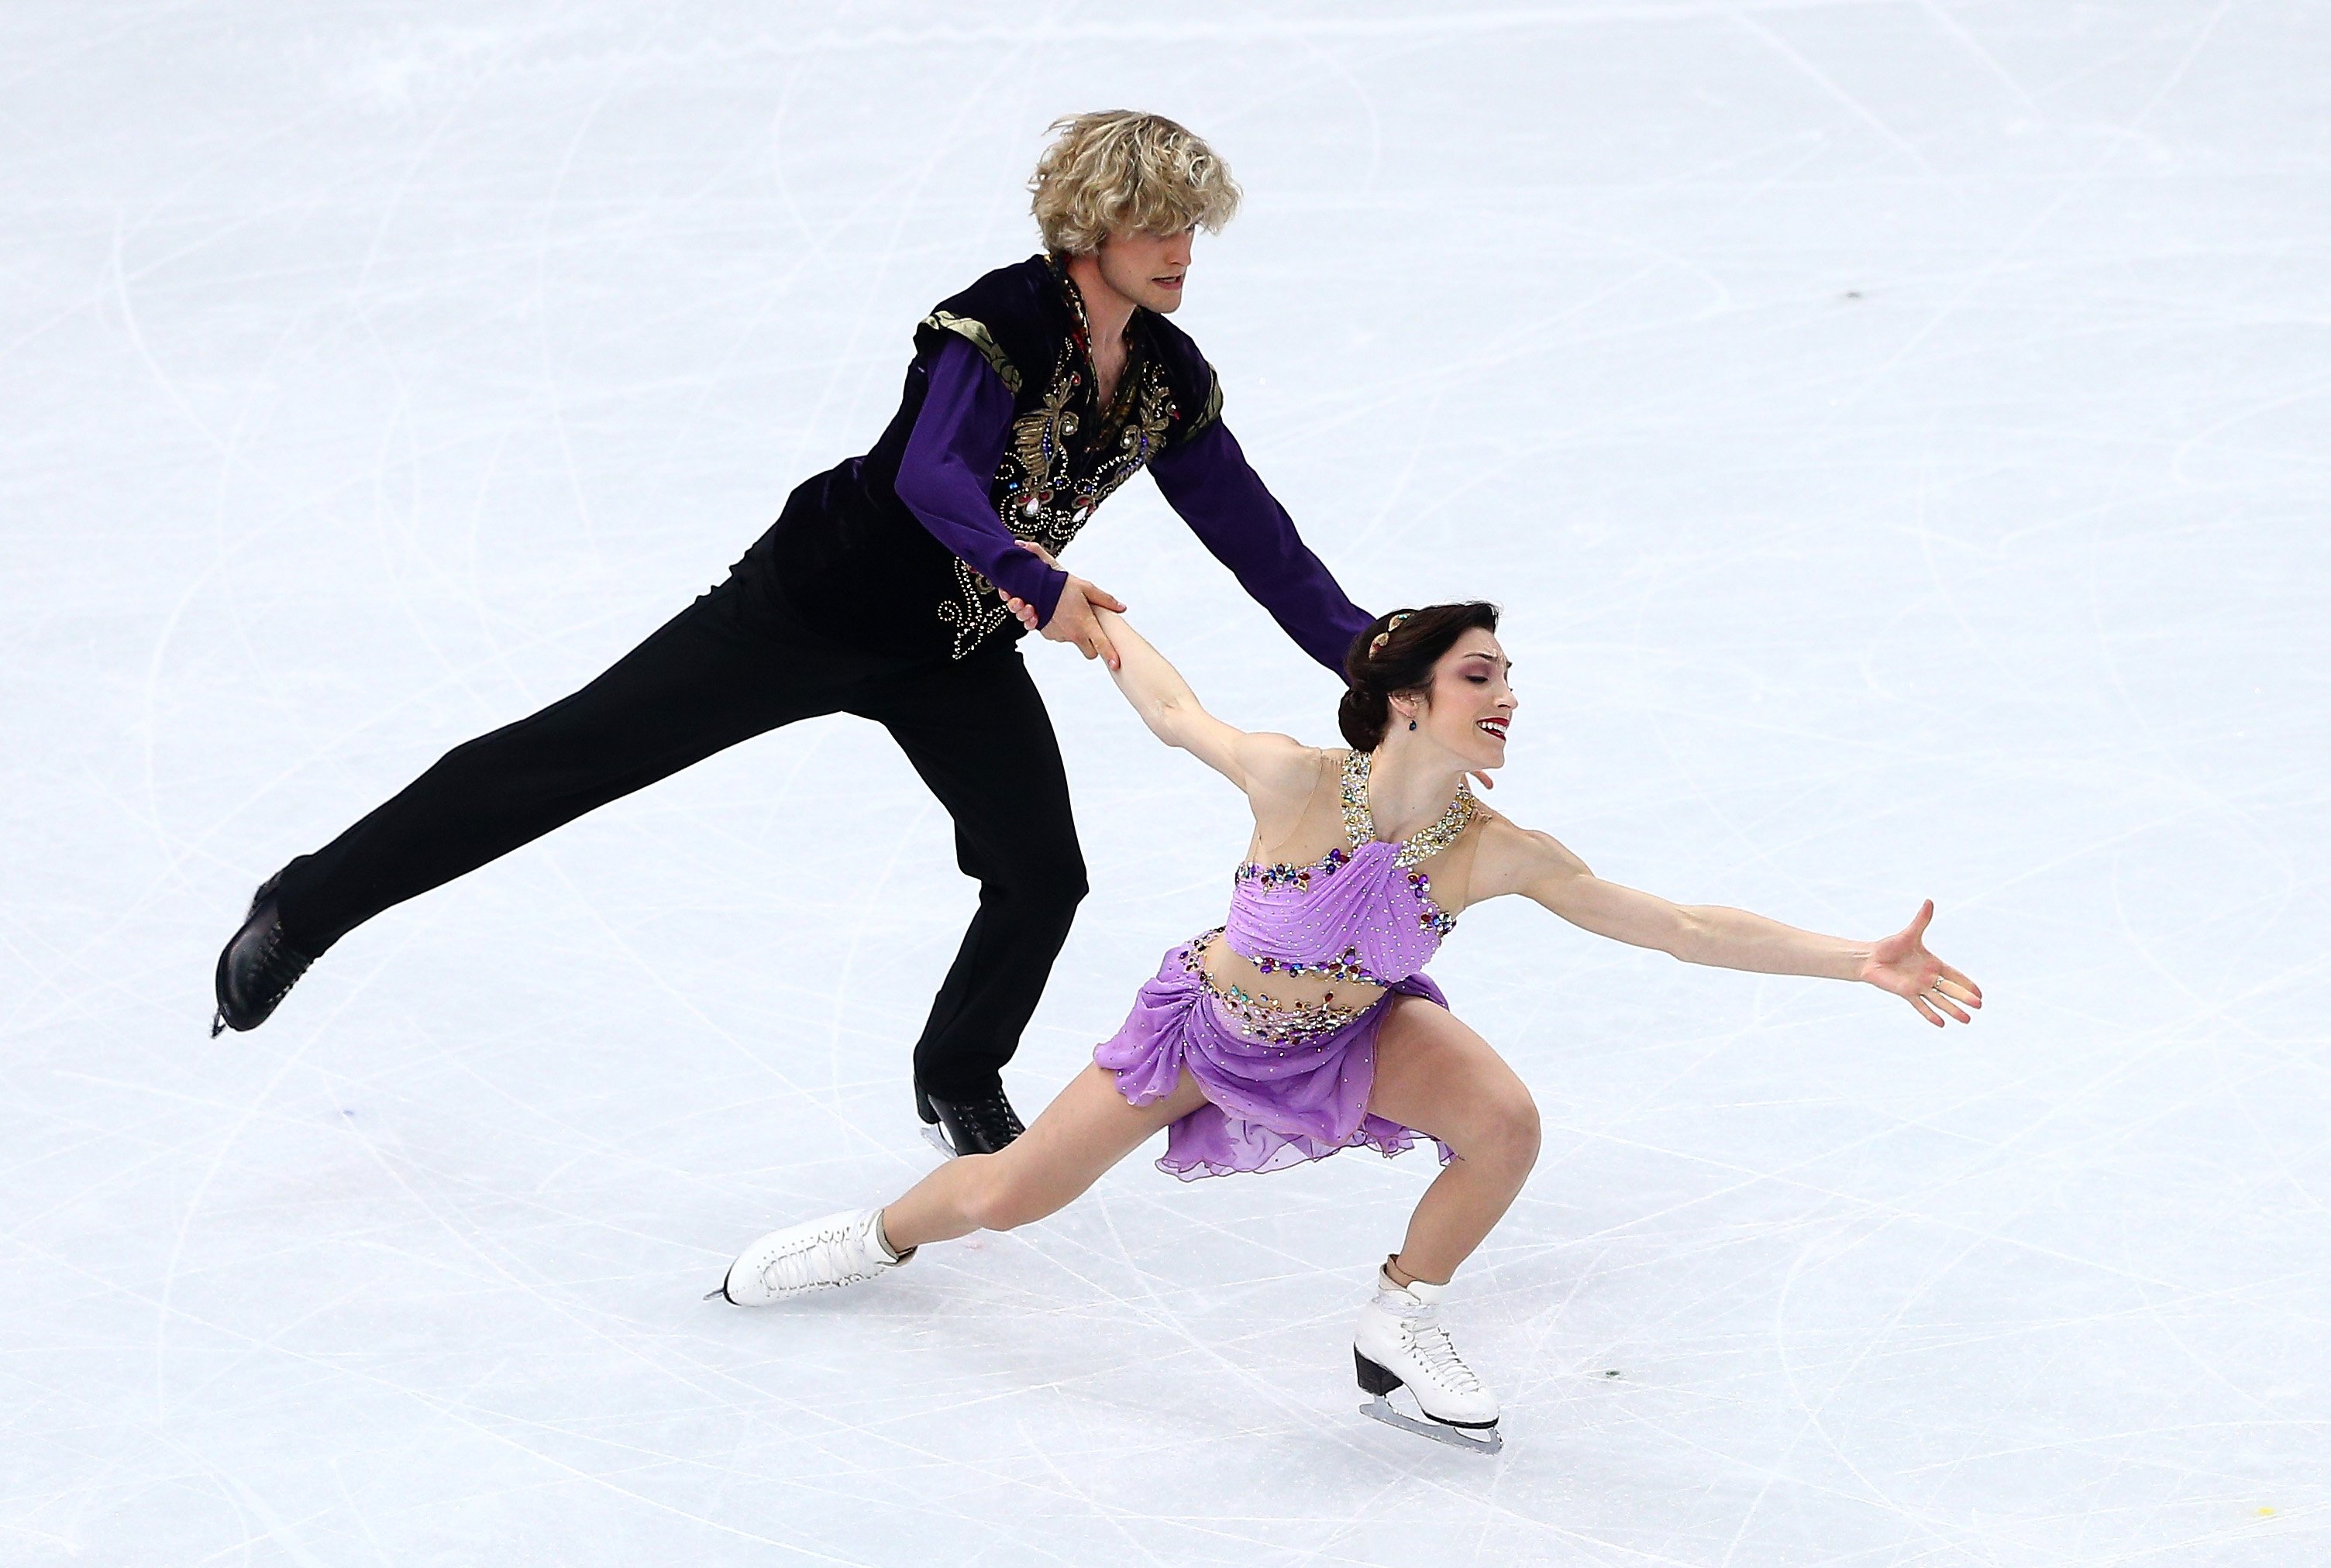 Meryl Davis and Charlie White of the United States compete in the Figure Skating Ice Dance Free Dance at Iceberg Skating Palace on February 17, 2014 in Sochi. (Clive Mason—Getty Images)